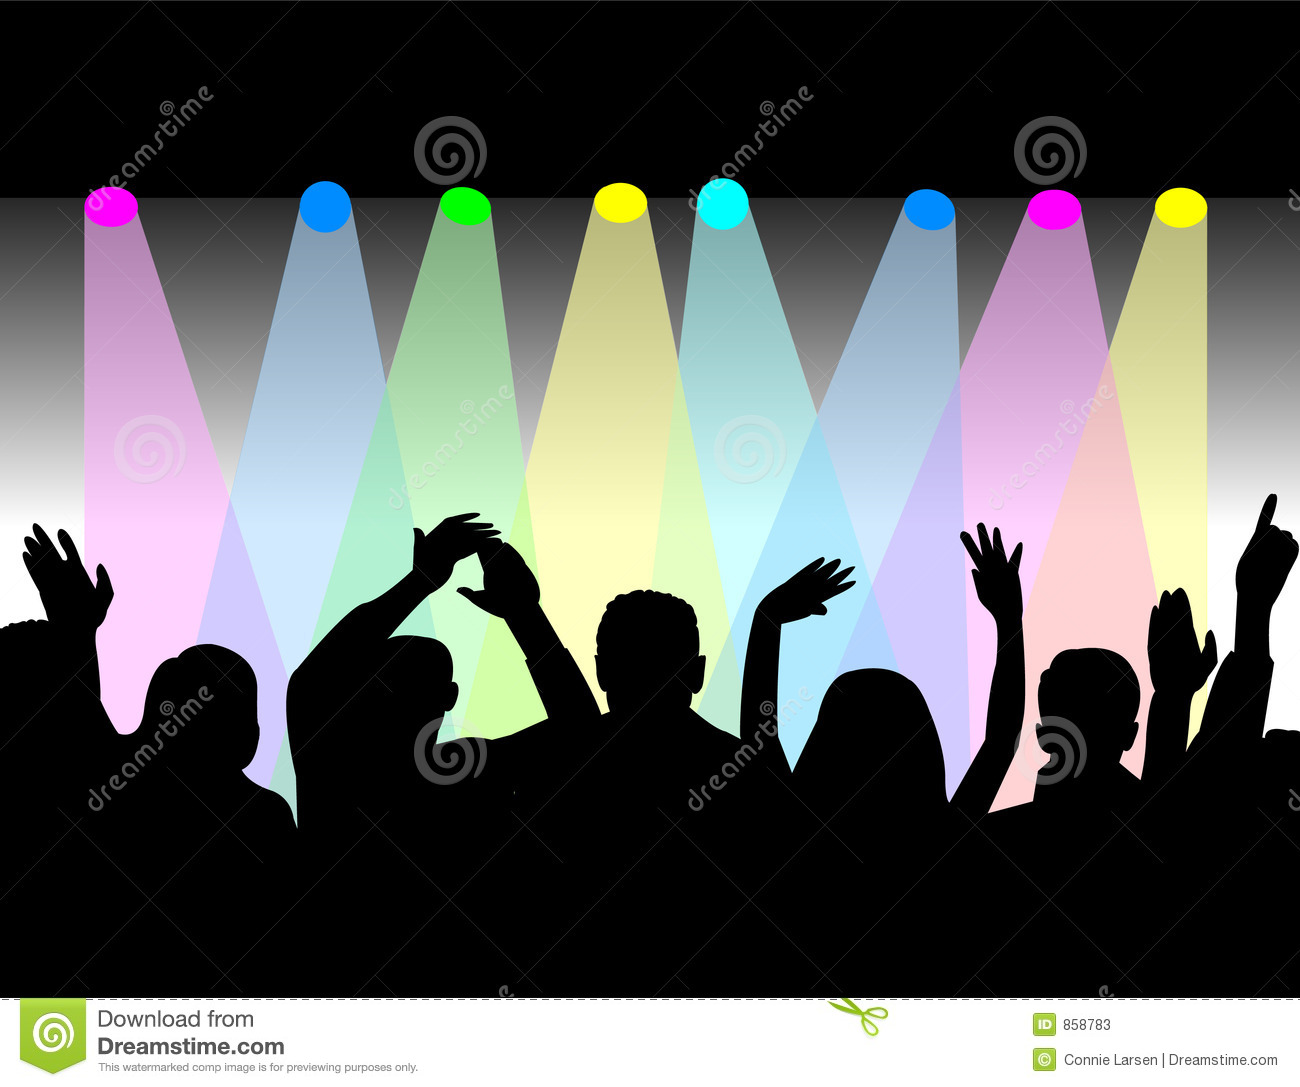 Illustration Of Multicolored Stagelights With An Audience In Sihouette